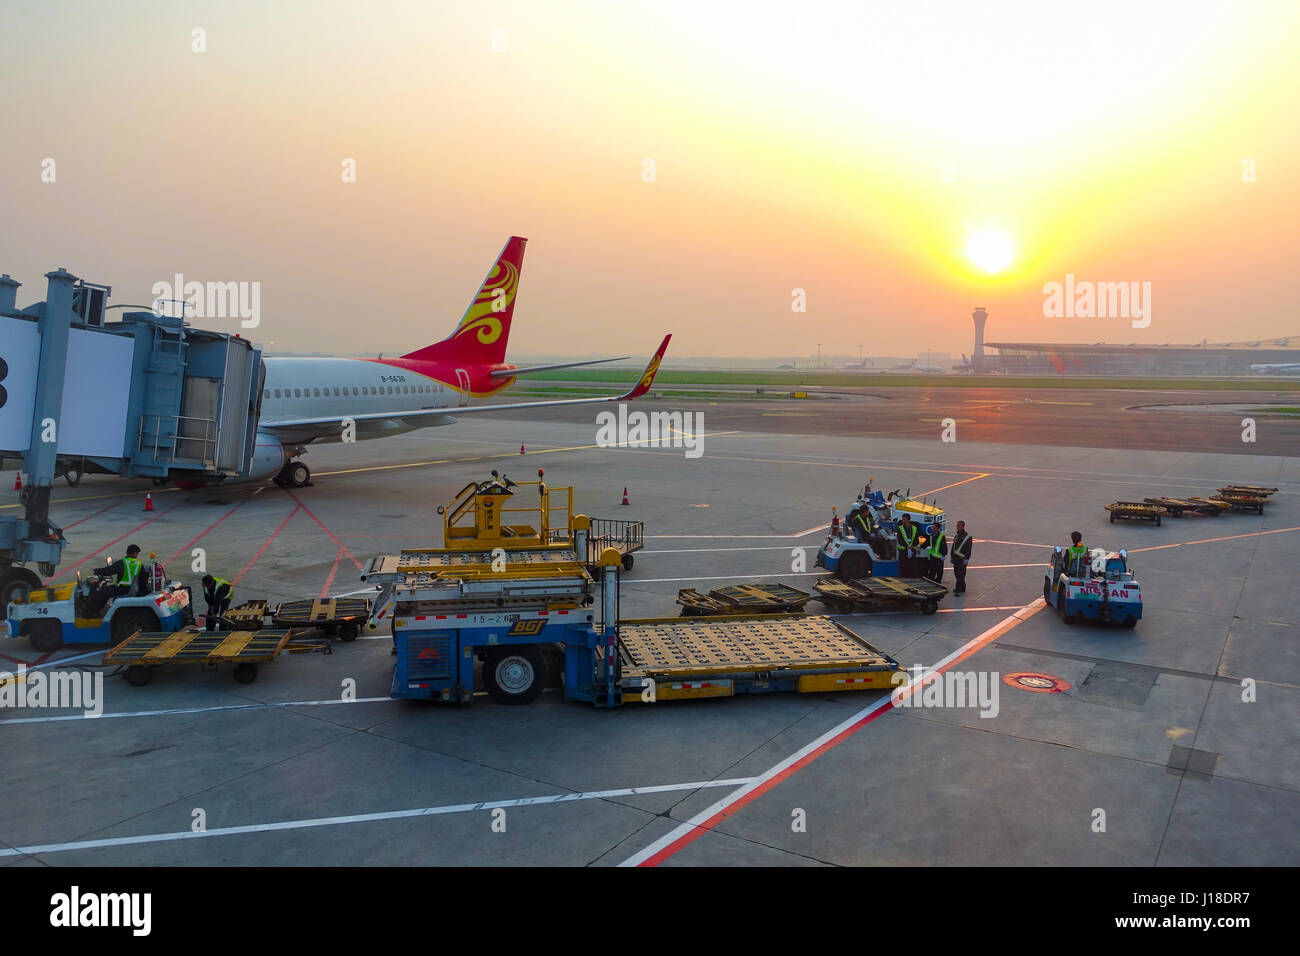 Beijing, China-May 19, 2016: The aircraft of Hainan Airlines is parked at the aerobridge of Beijing capital international airport with ground handling Stock Photo